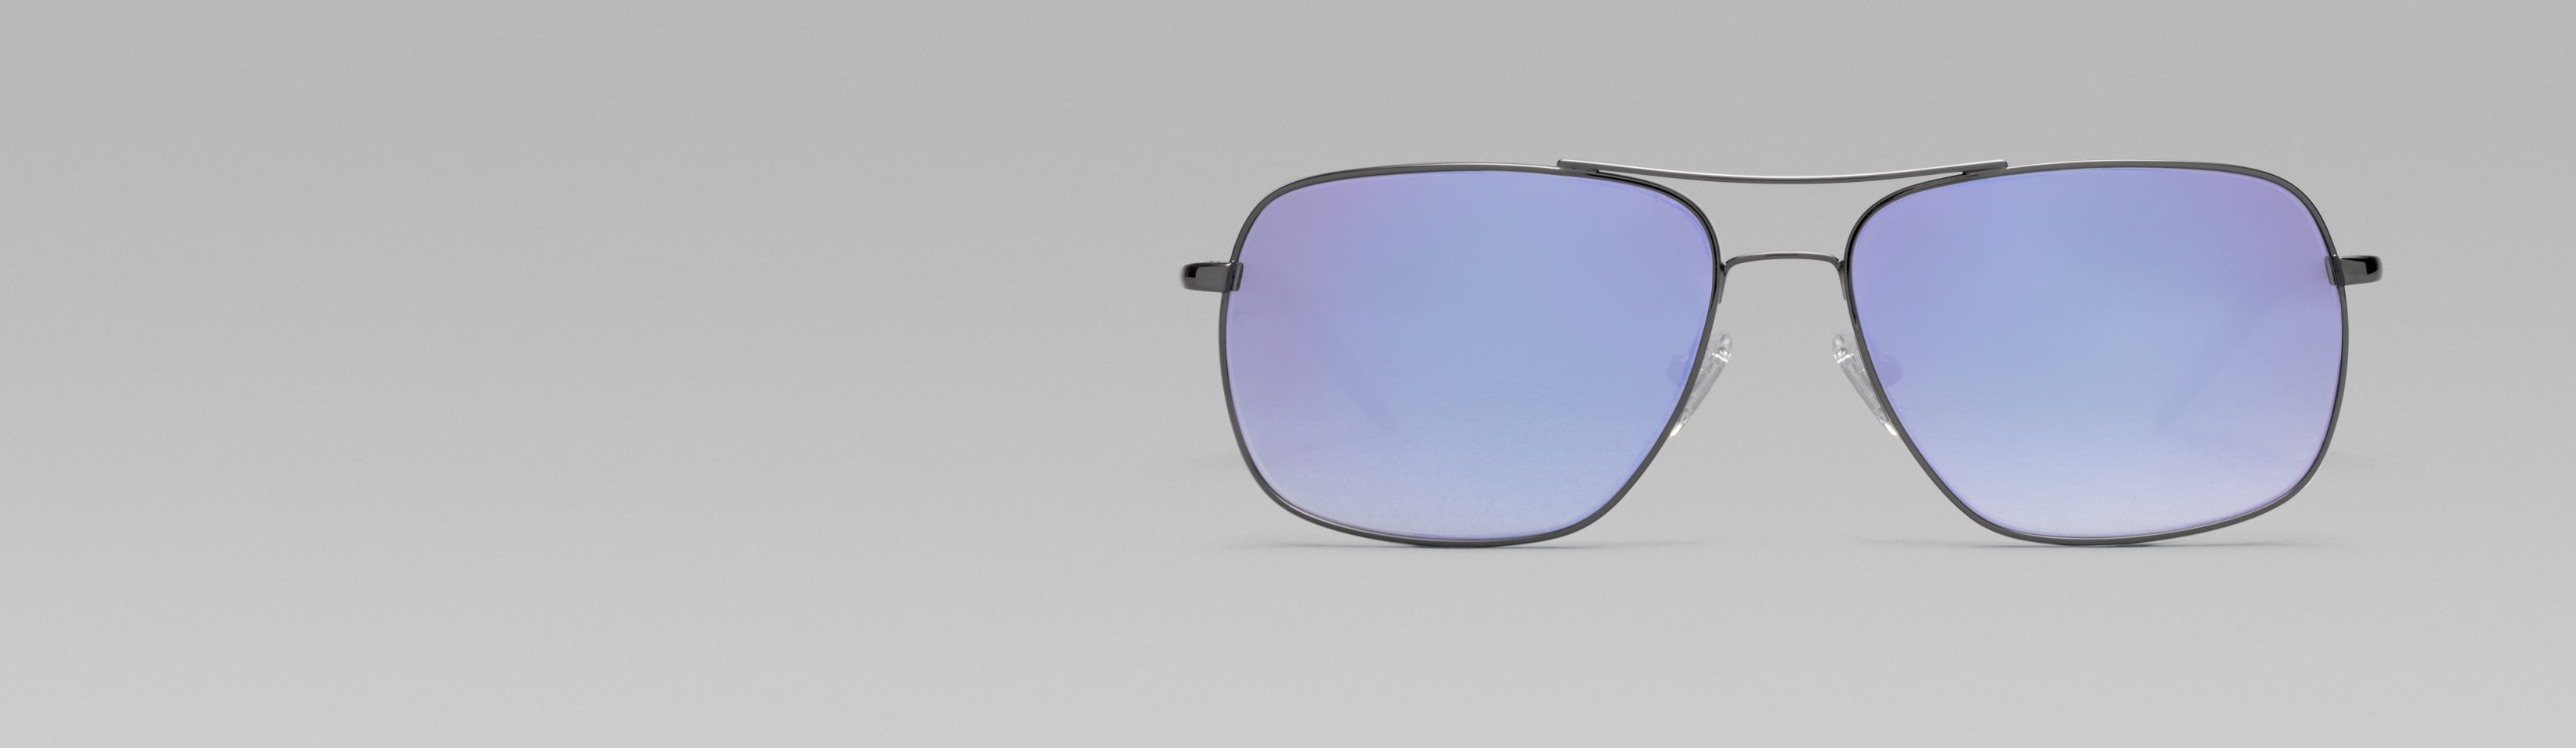 Rotating image of Zenni Premium Aviator Sunglasses #1127812 in gray with tinted lens (gradient gray and blue tint) and mirror coating options (sky blue, moss green, and lavender mirror).